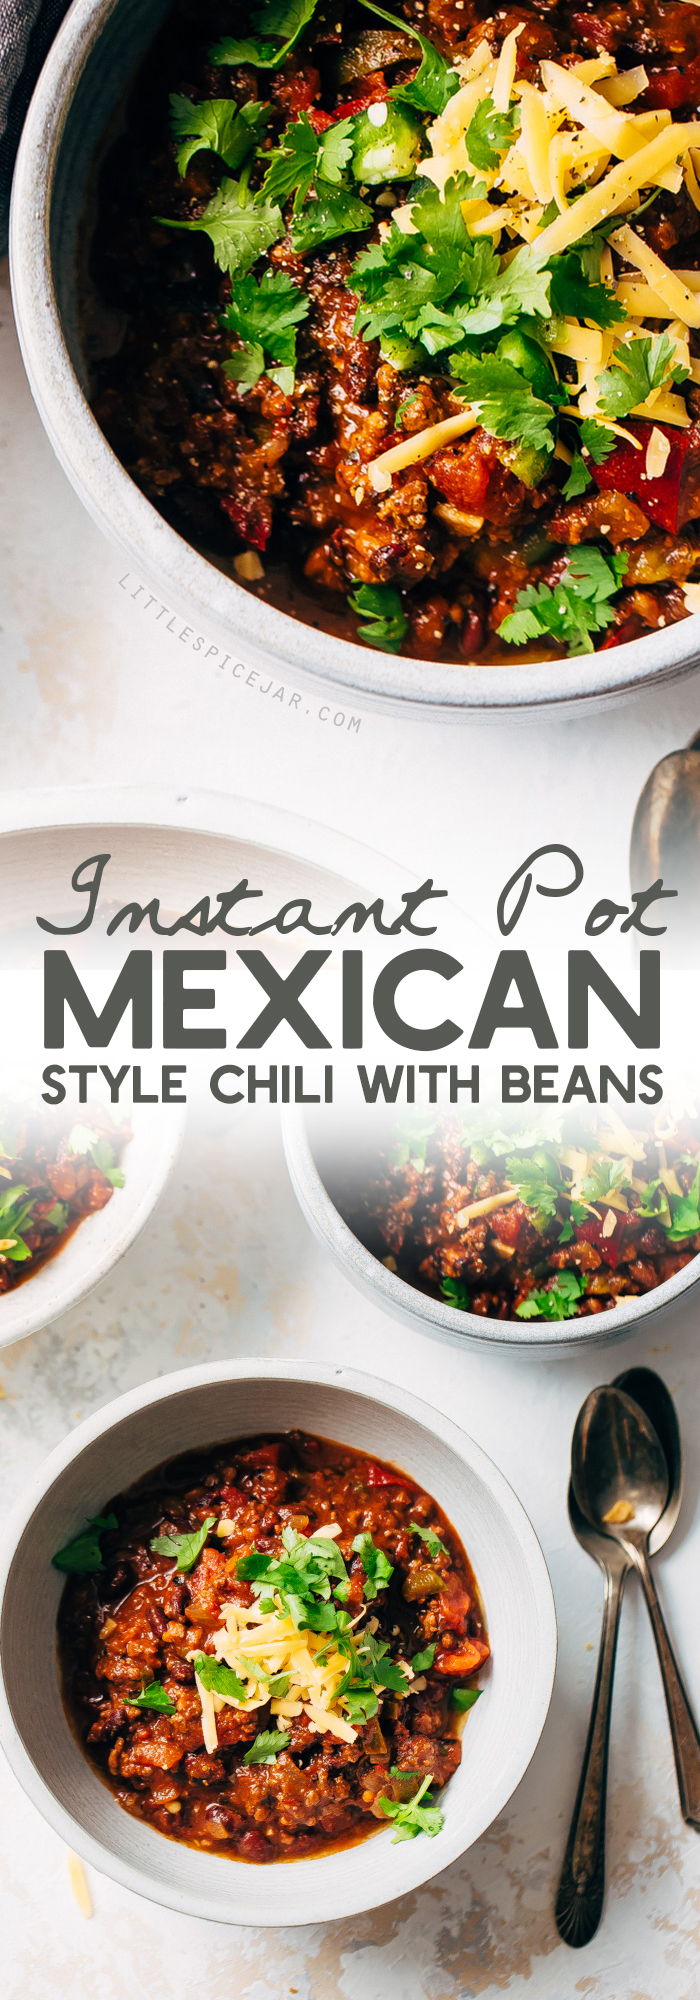 Instant Pot Mexican Chili With Black Beans Recipe Little Spice Jar